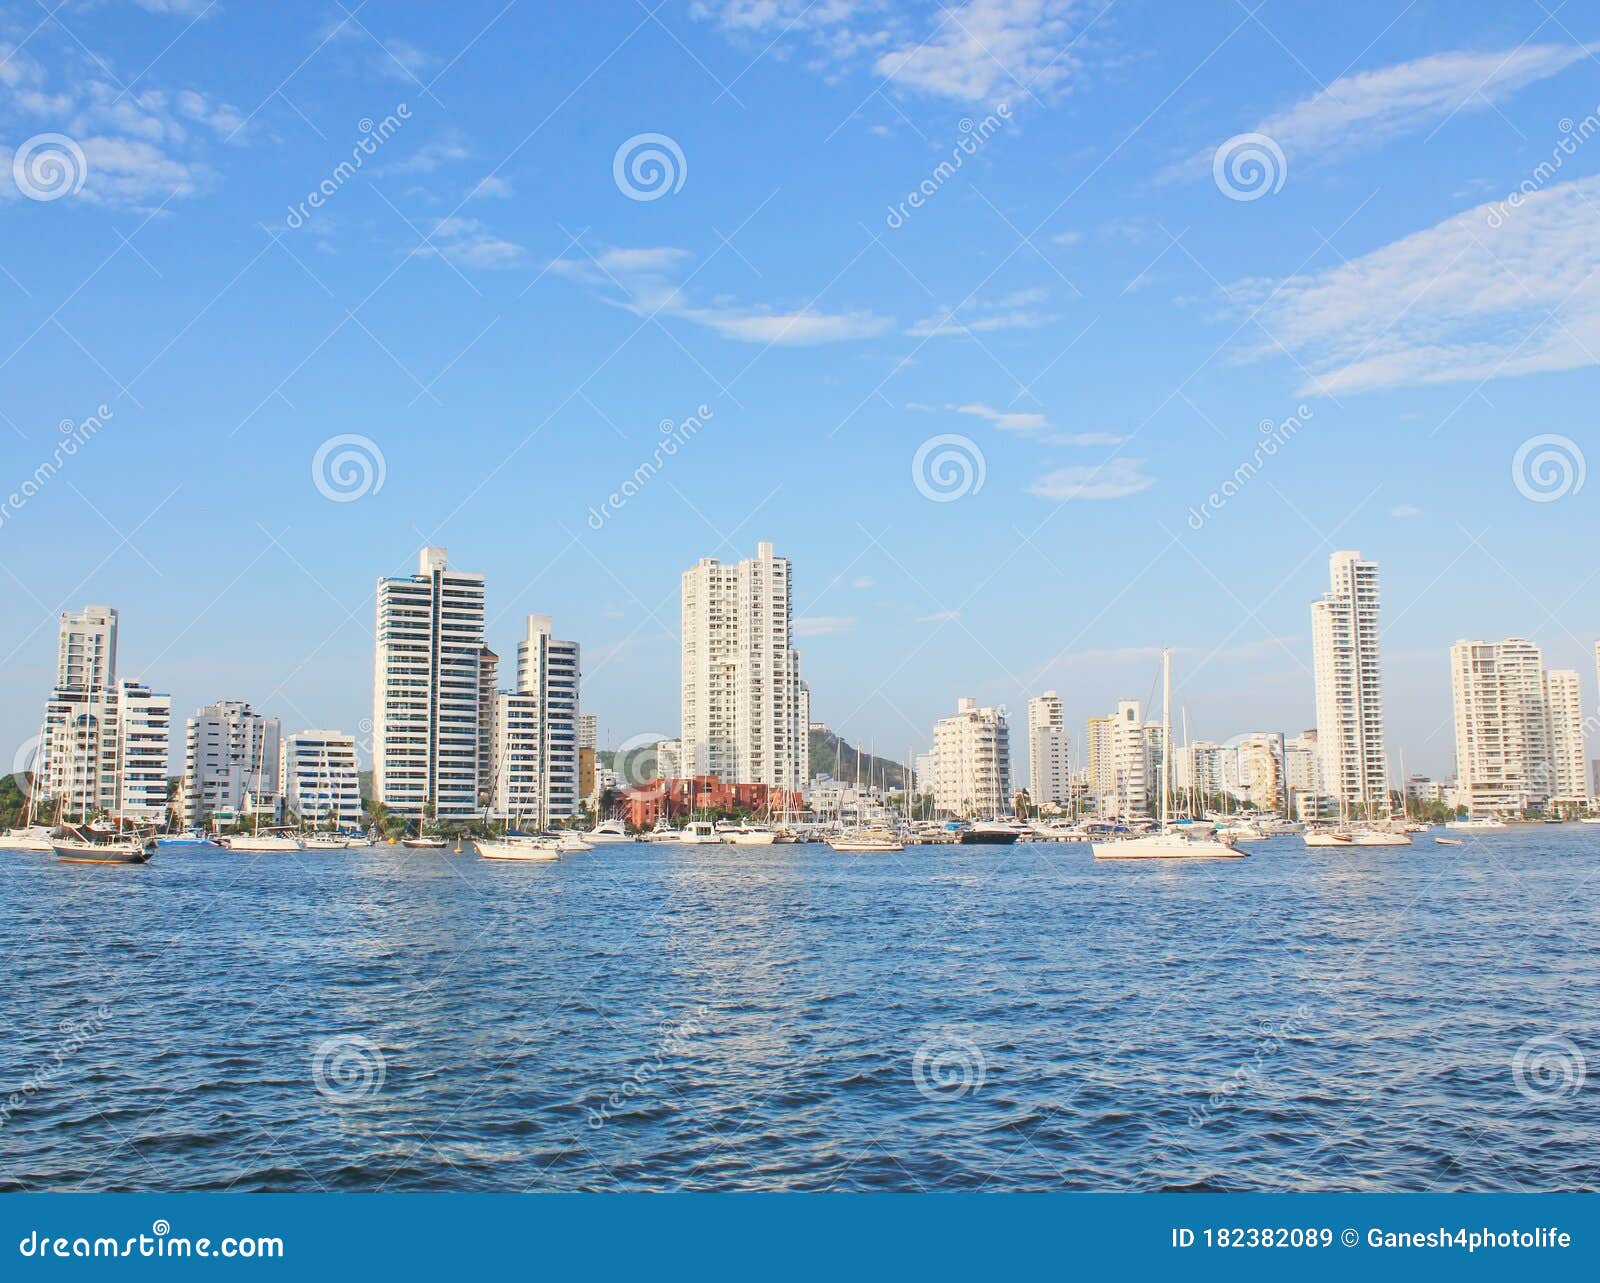 view of cartagena city, colombia